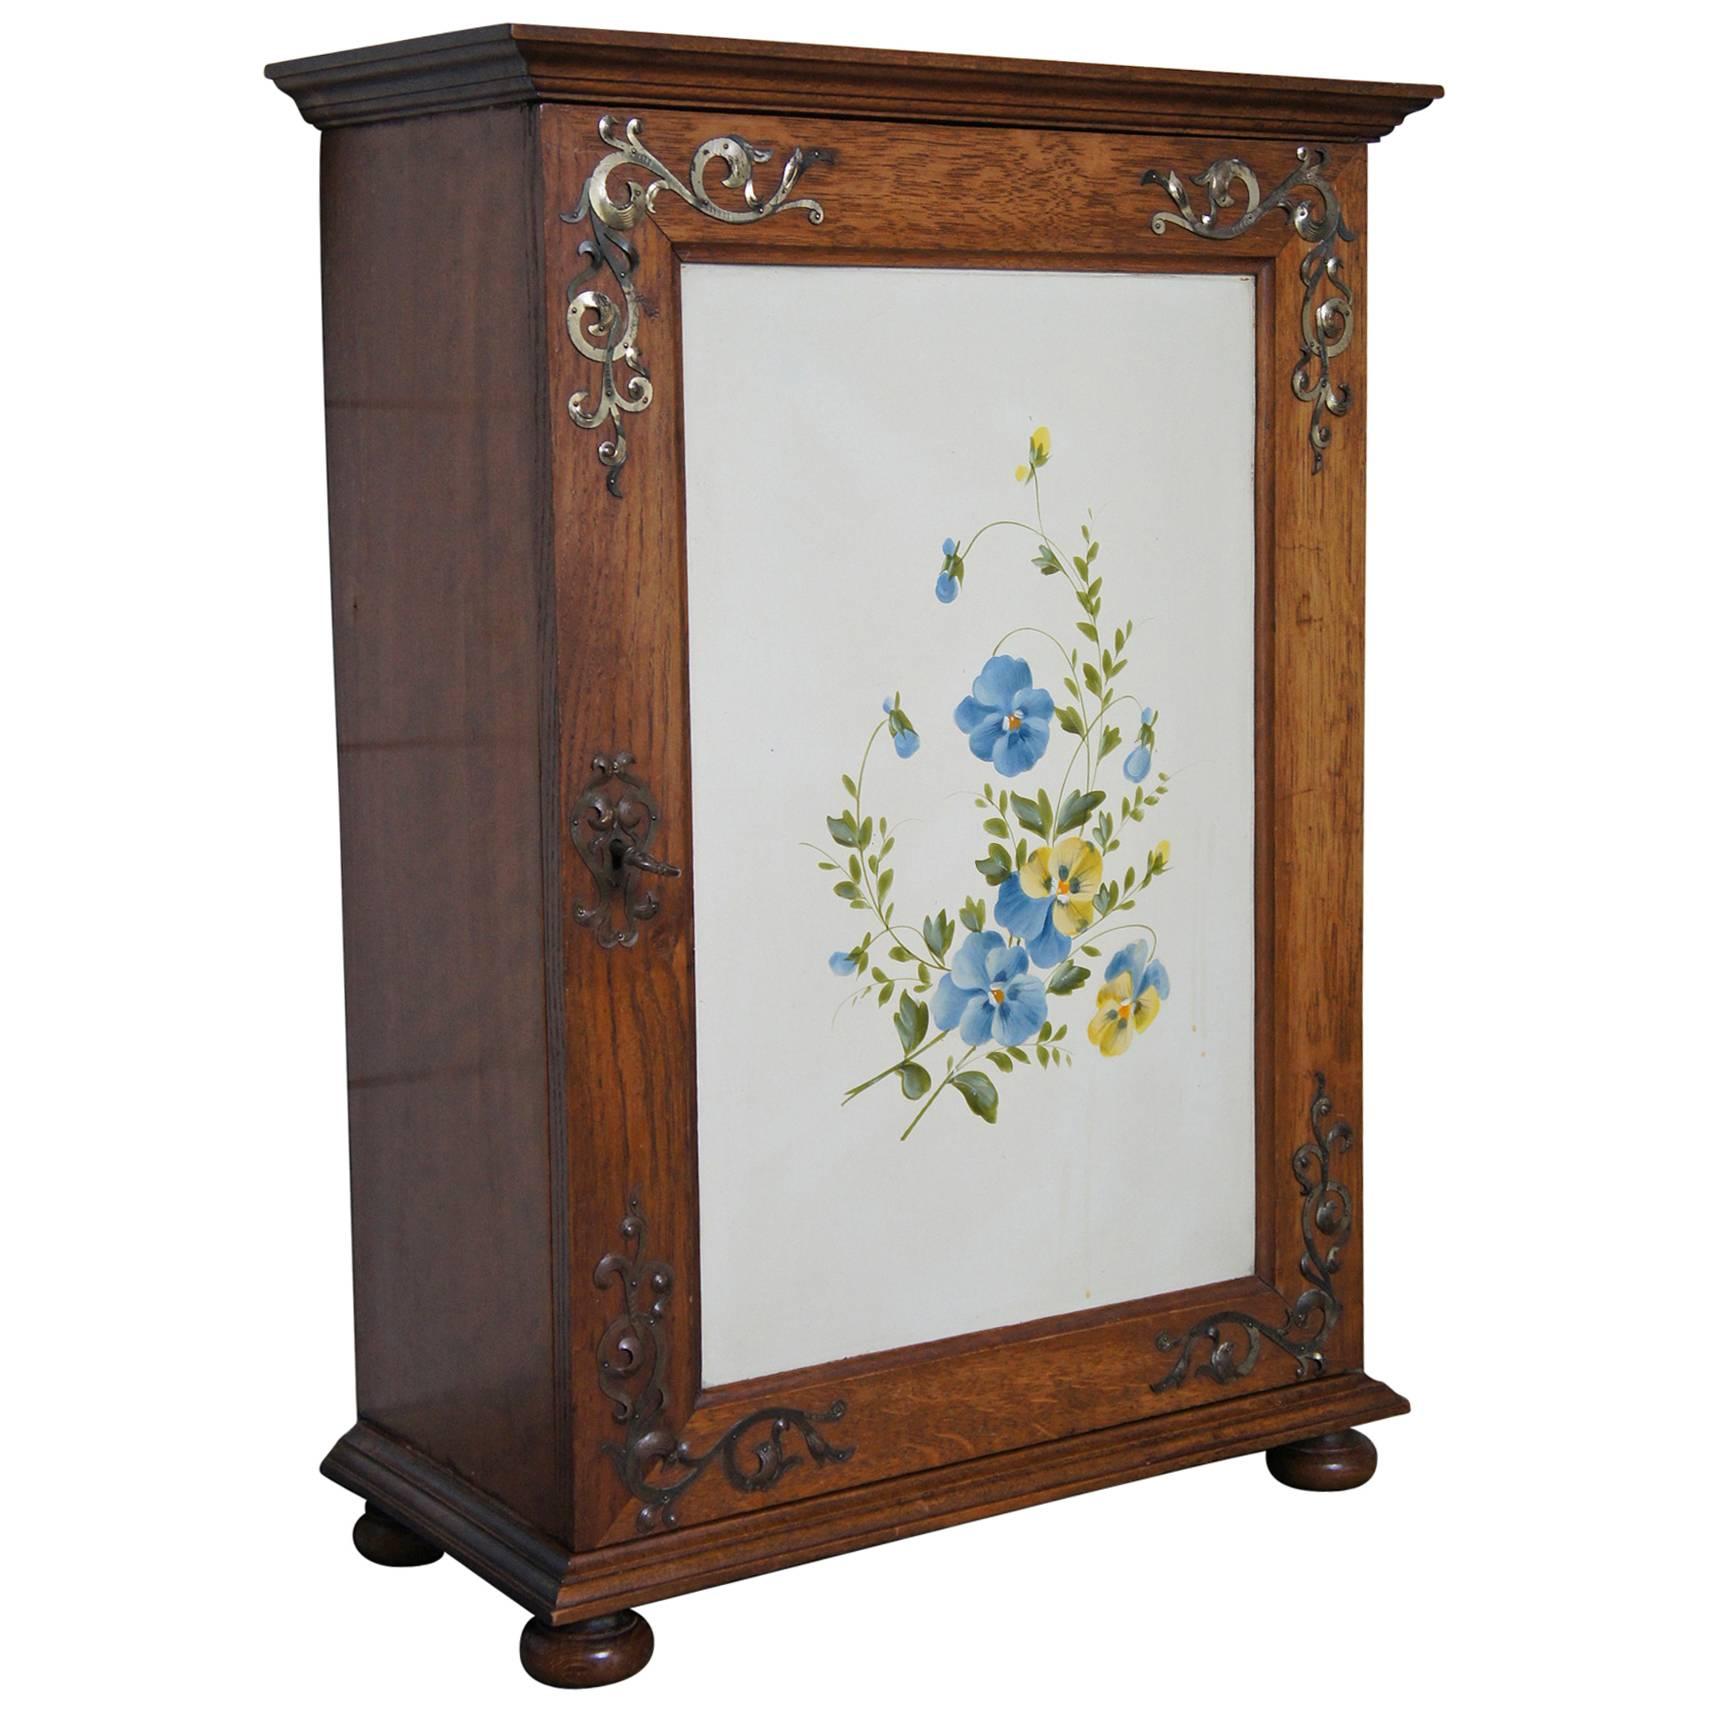 Late 19th Century Miniature Jugendstil Cabinet with Hand-Painted Flowers on Zinc